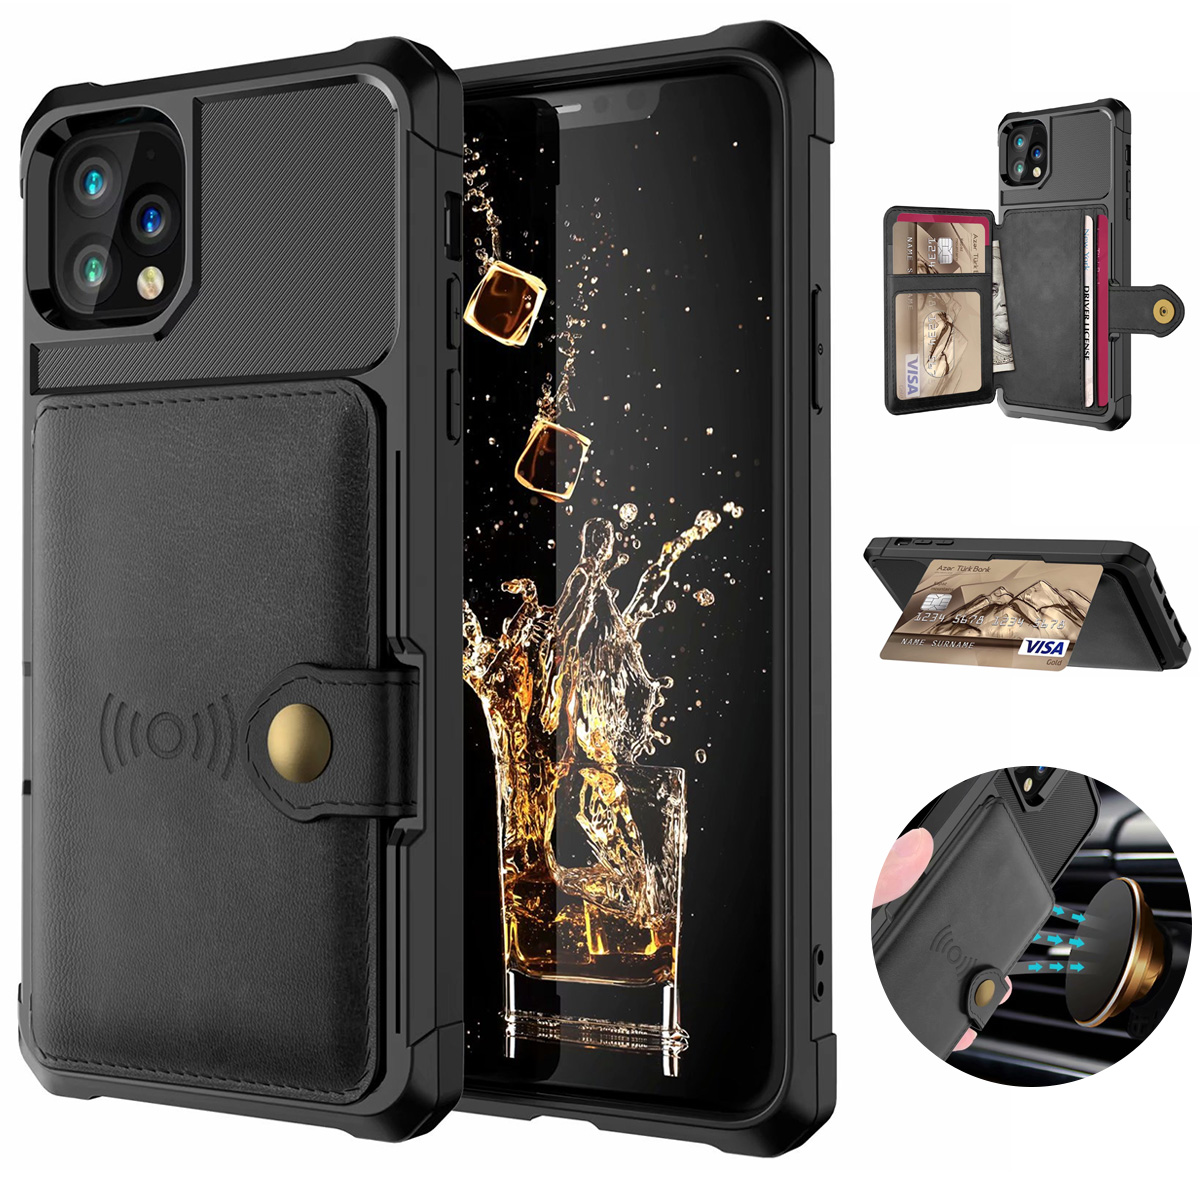 

Luxury Armor Magnetic Adsorption Multi Card Slots Stand PU Leather Shockproof Wallet Protective Case for iPhone 11 / Pro / Pro Max